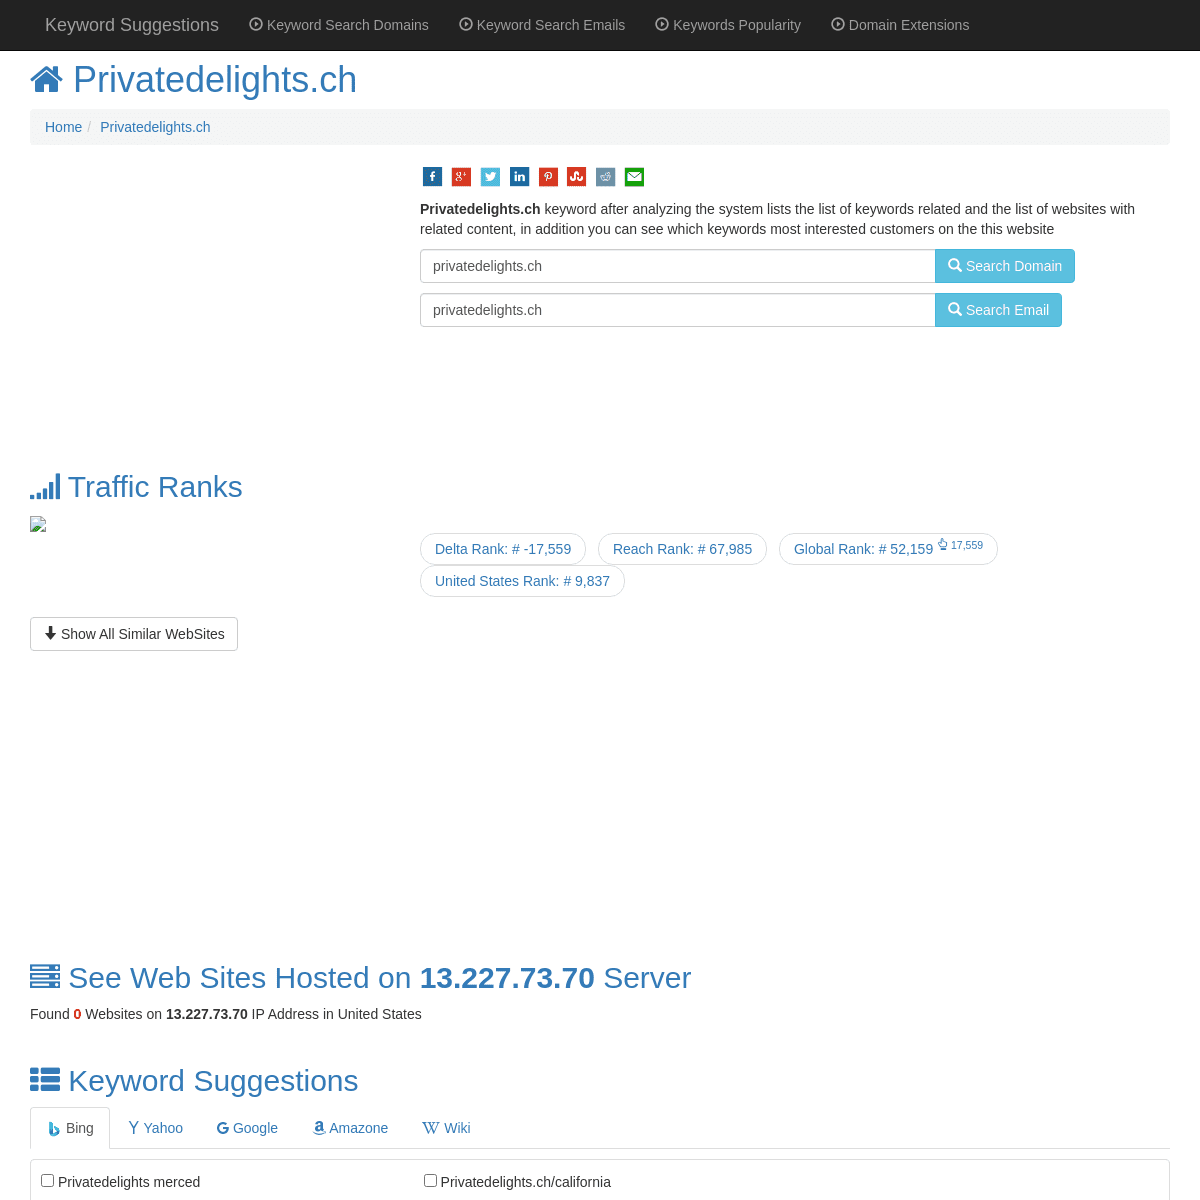 A complete backup of https://www.keyword-suggest-tool.com/search/privatedelights.ch/